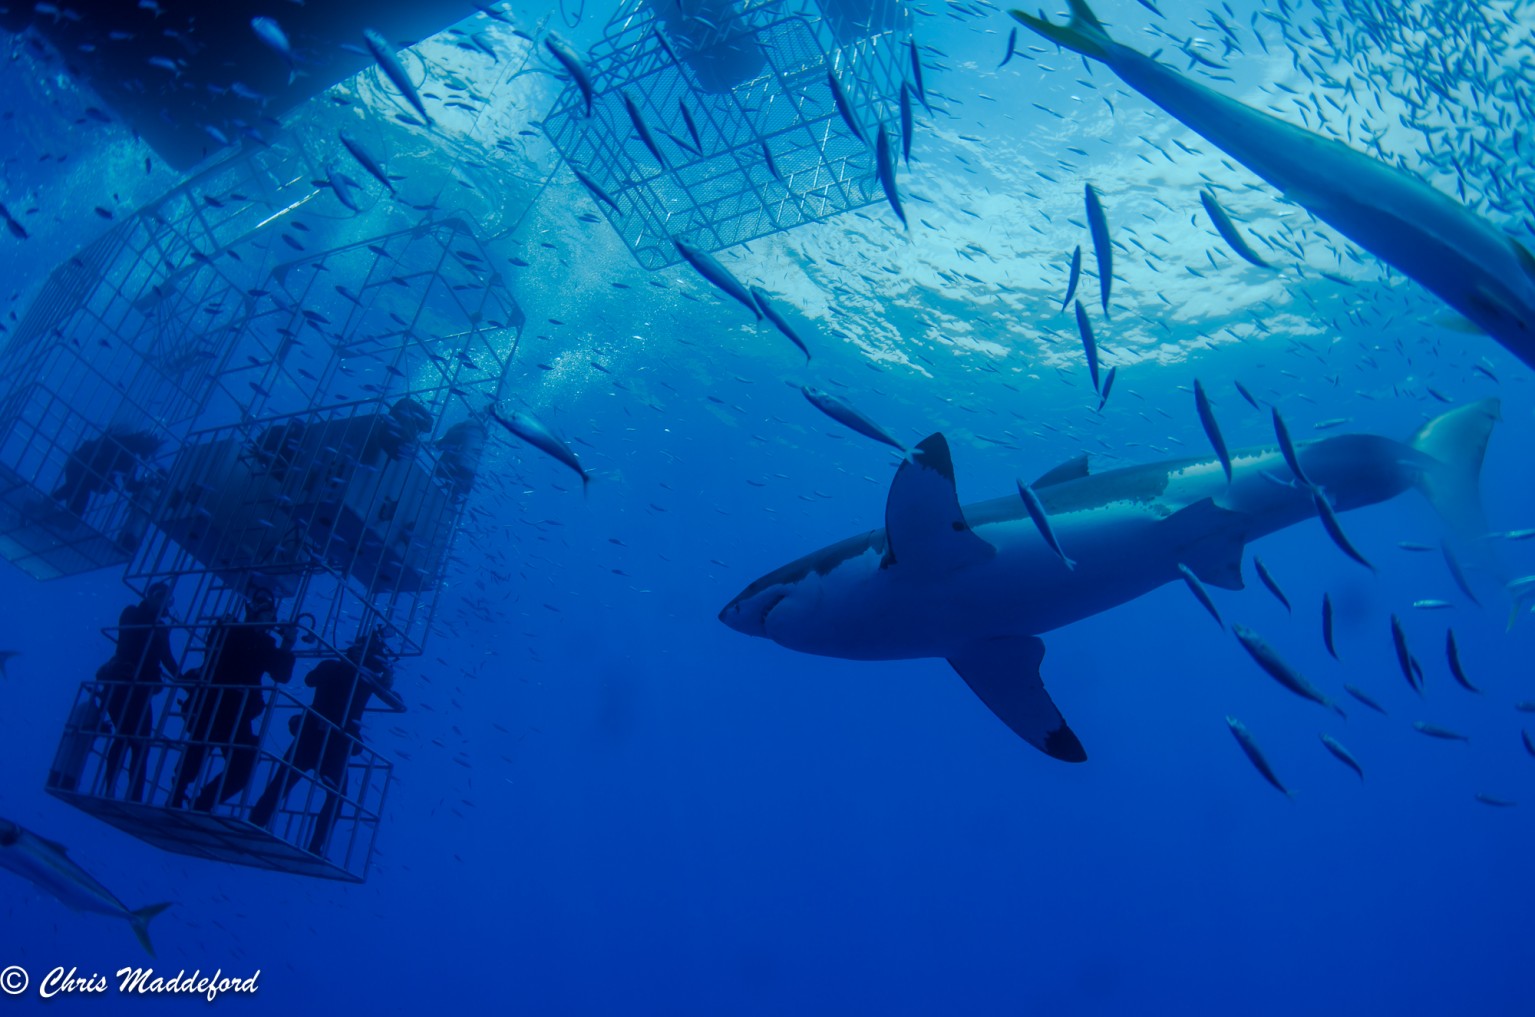 The Great White Sharks were peaceful, majestic, and thrilling to observe.